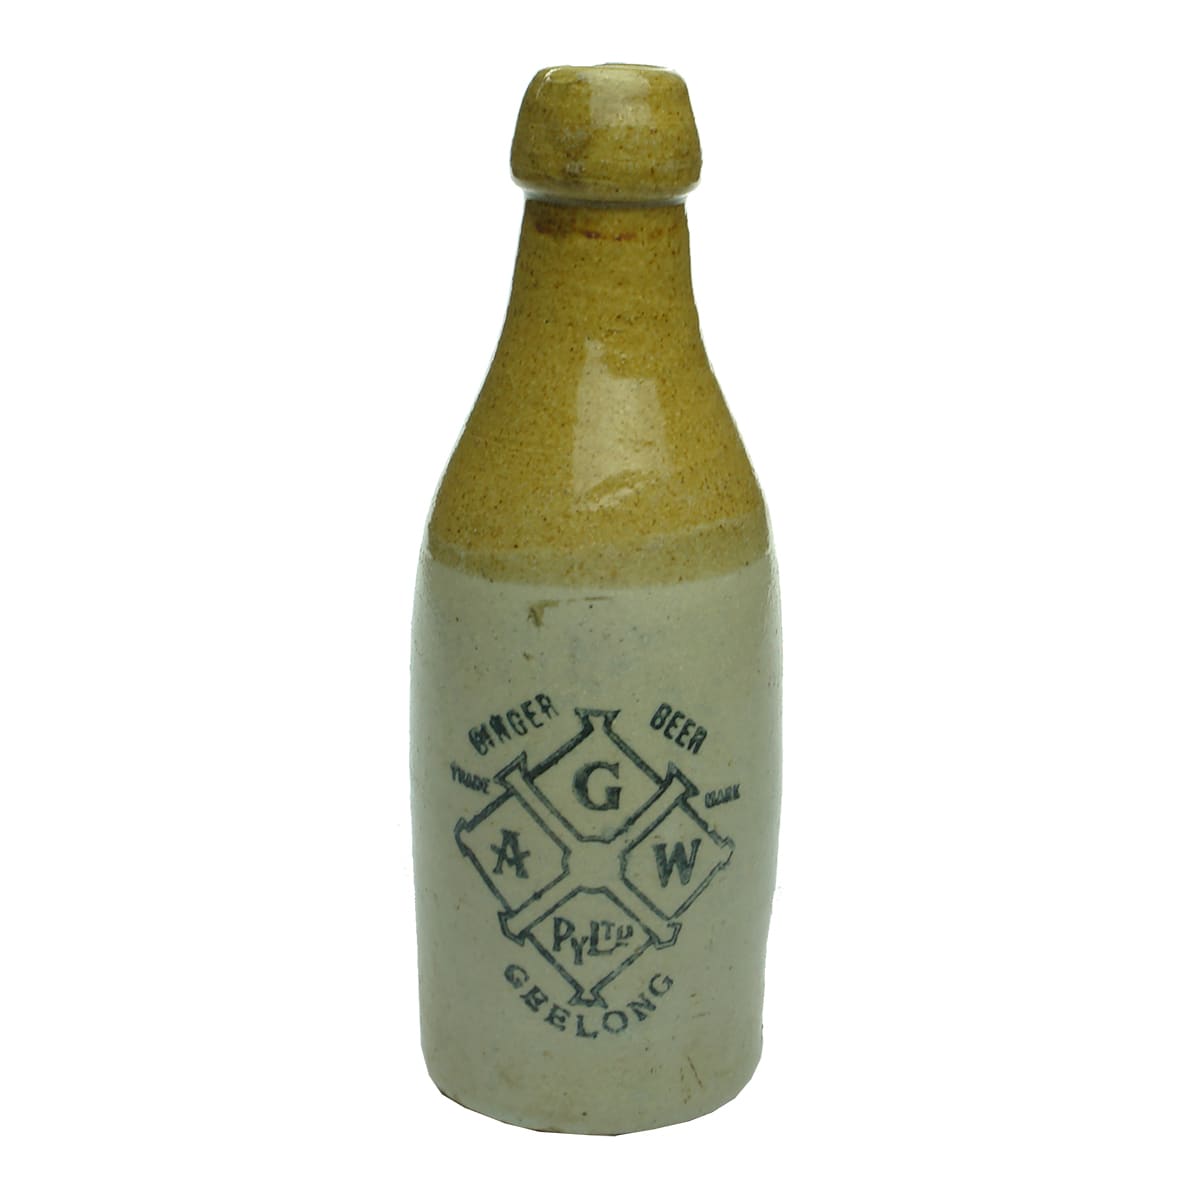 Ginger Beer. Geelong Aerated Waters. With Extra Print. Champagne. Tan Top. 10 oz. (Victoria)